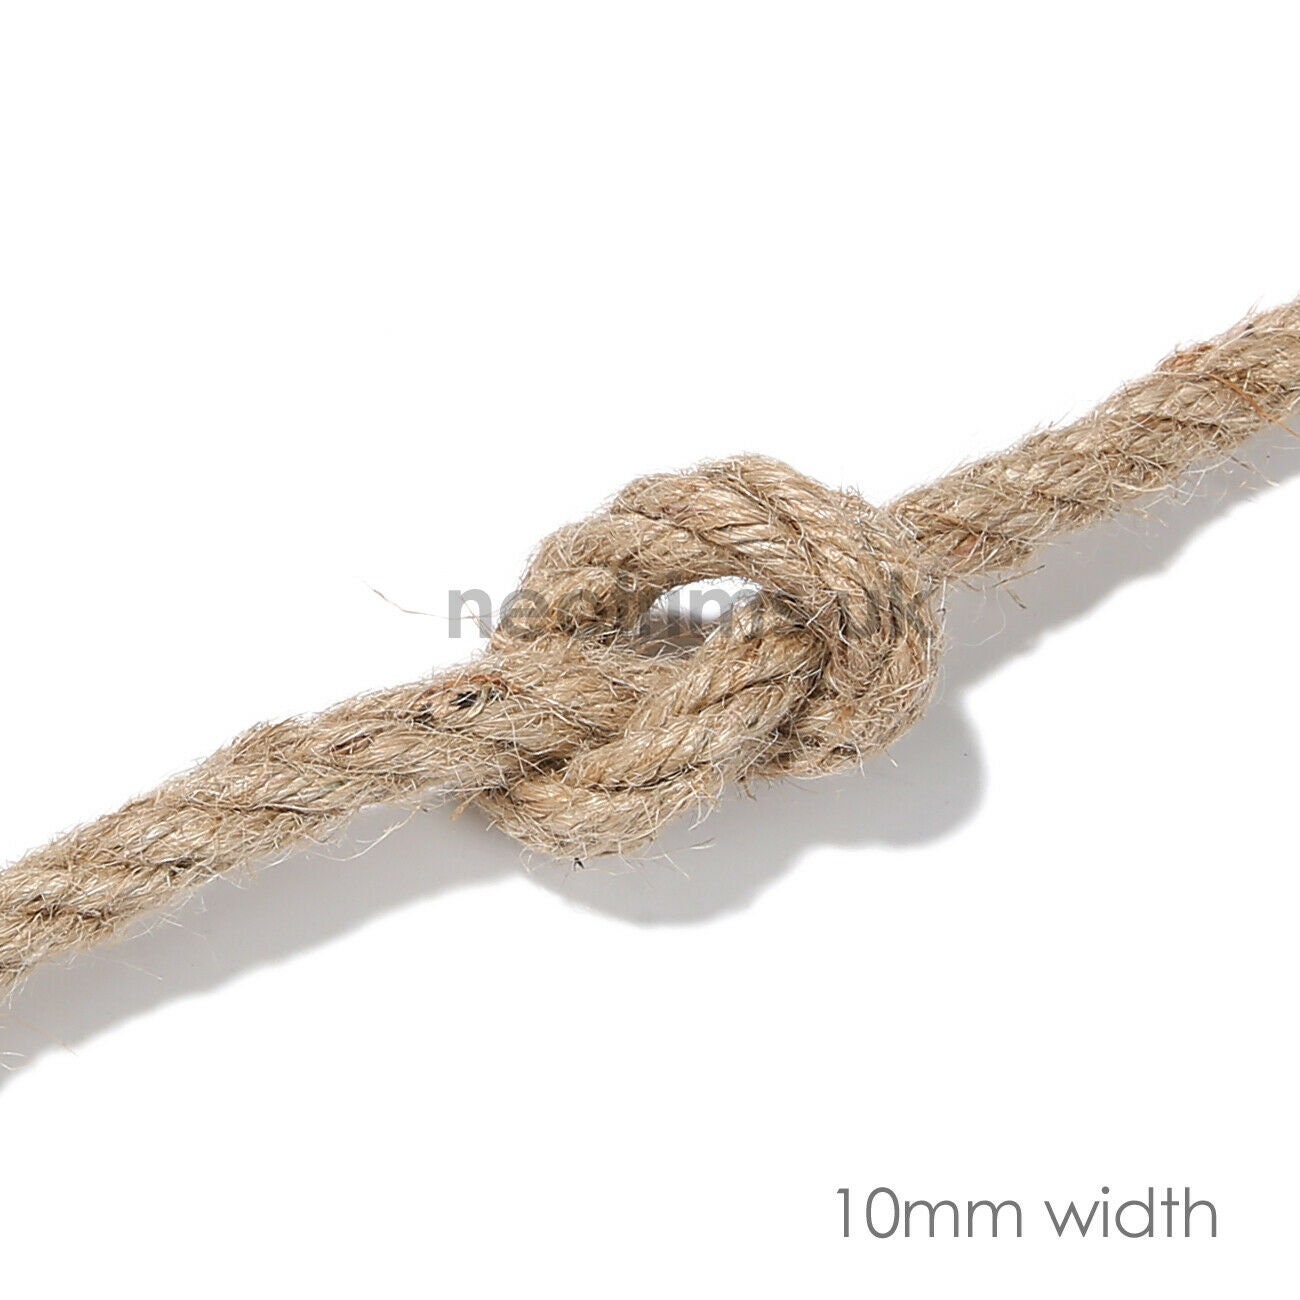  Natural Thick 3mm Jute Twine Large Ball by AAYU, 3 Ply 400  Feet